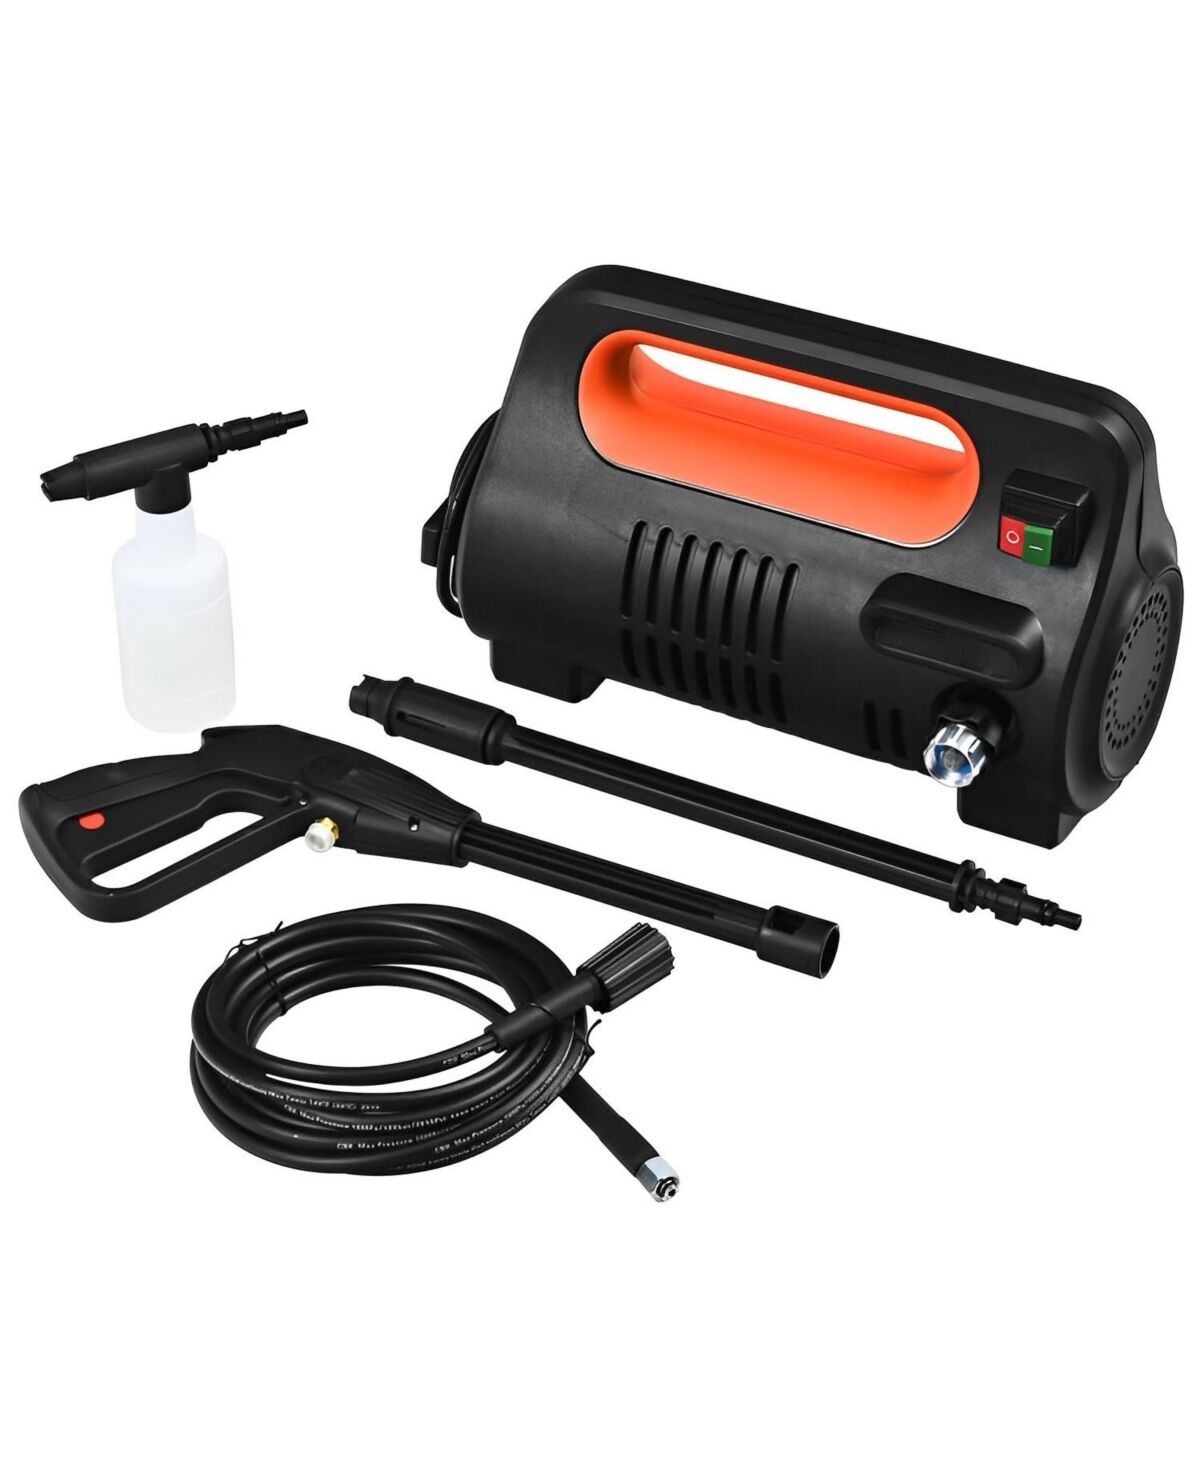 Sugift Compact High Power Pressure Washer Car Cleaning Machine with Adjustable Nozzle - Black